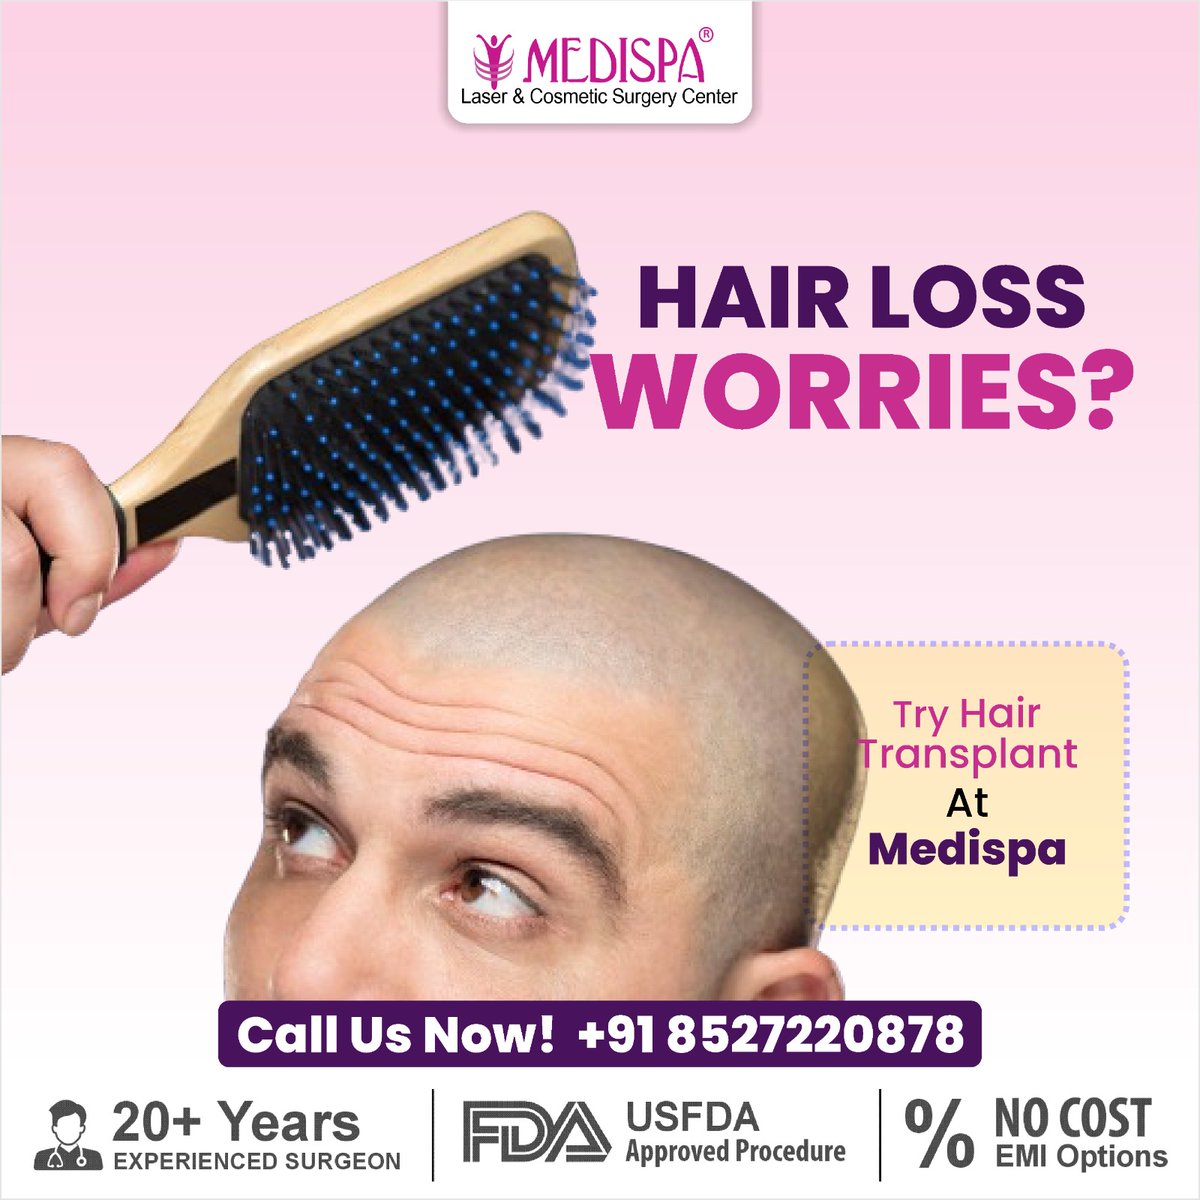 Transform your hairline and regain your confidence with a hair transplant! Book your appointment now!
👉 Call: +91-8527220878
👉 Email: info@medispaindia.in
👉 Visit: medispaindia.in/online-query/
#hairtransplant #HairTransplantCost #drsuneetsoni #haircare #HairRestoration #hair